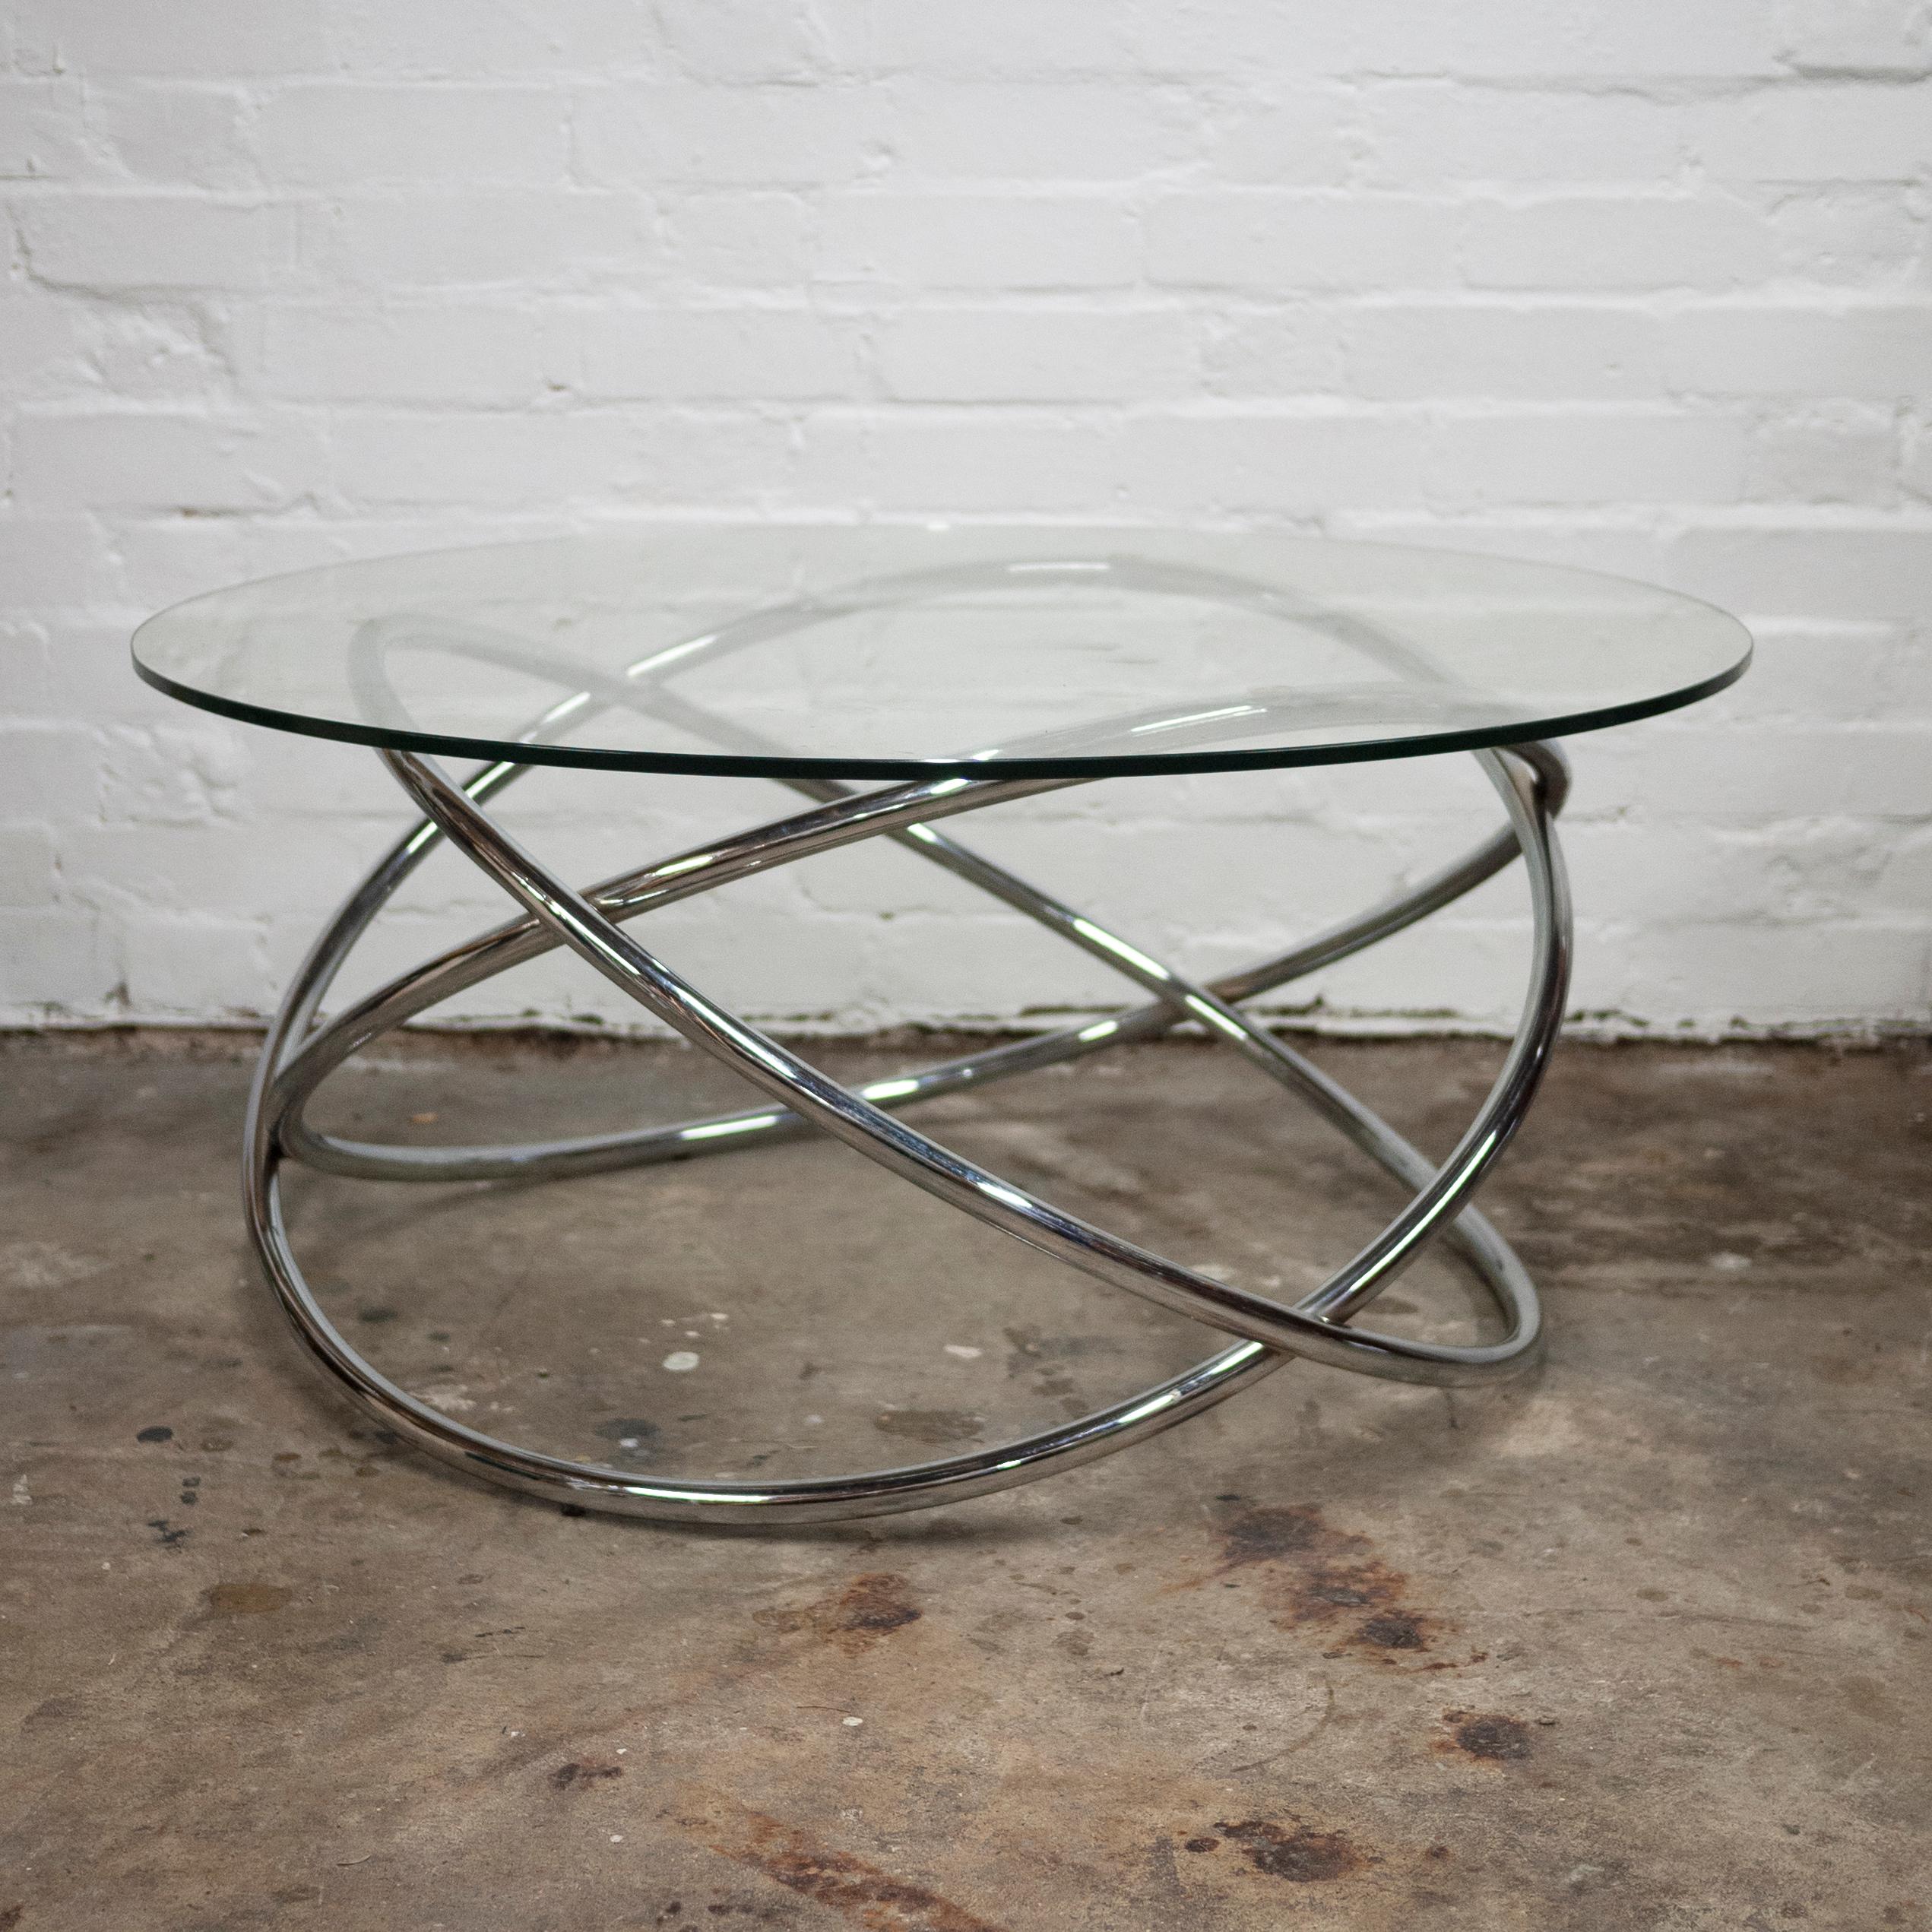 Vintage Italian Space Age Glass and Chrome Spiral Base Coffee Table, 1970s For Sale 2